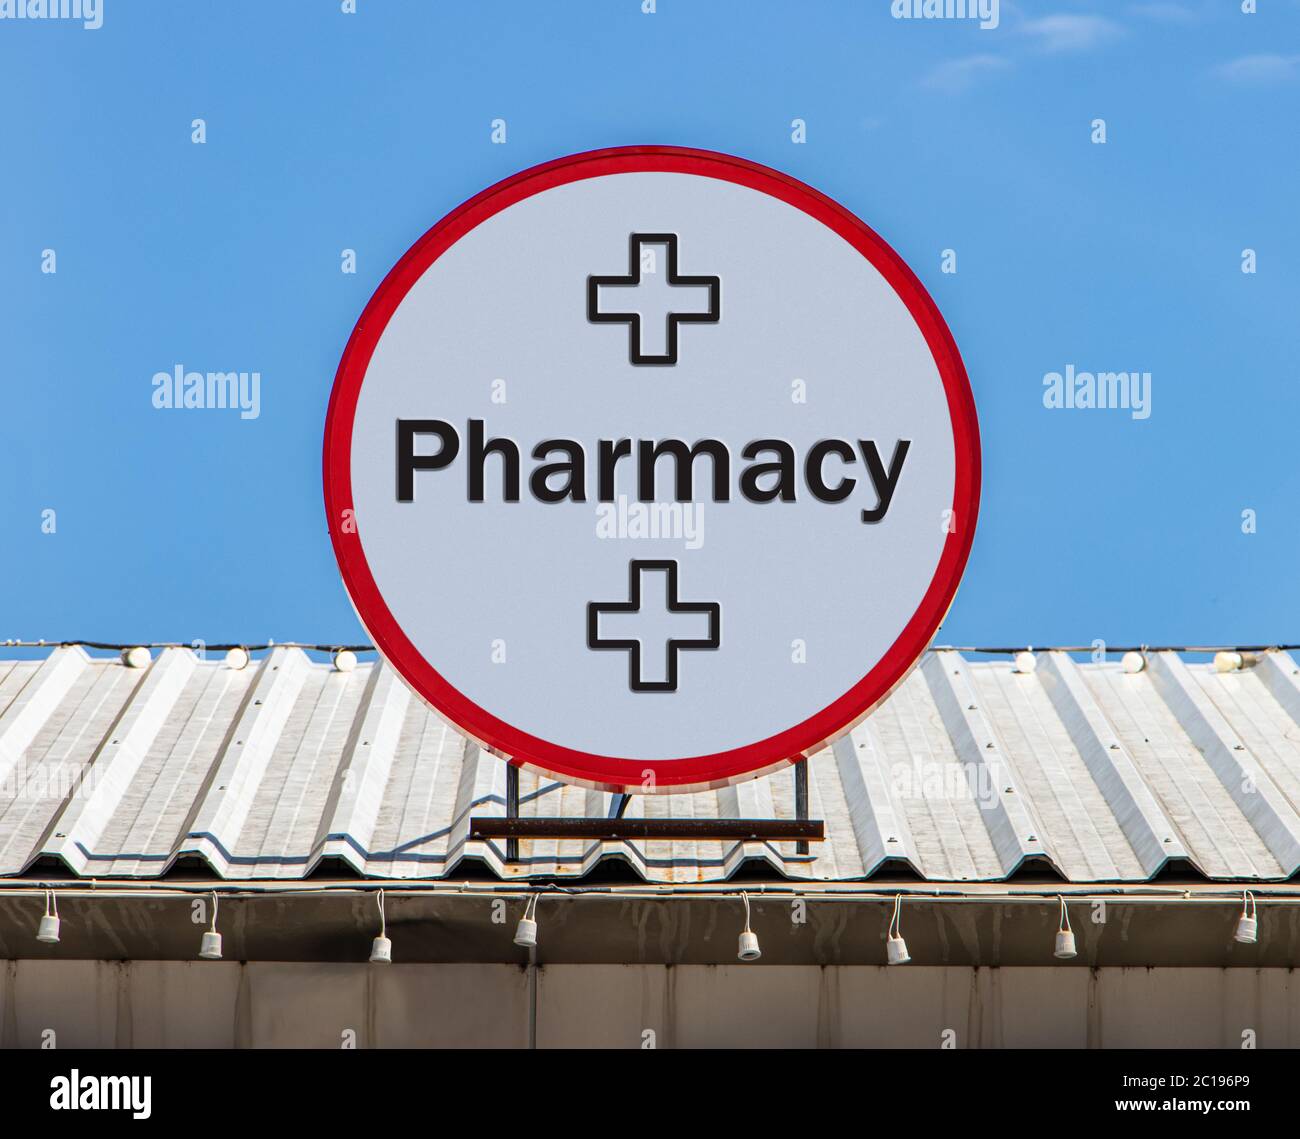 A Circle billboard with text Pharmacy, is installed on a roof. Sign of Drugstore. Stock Photo